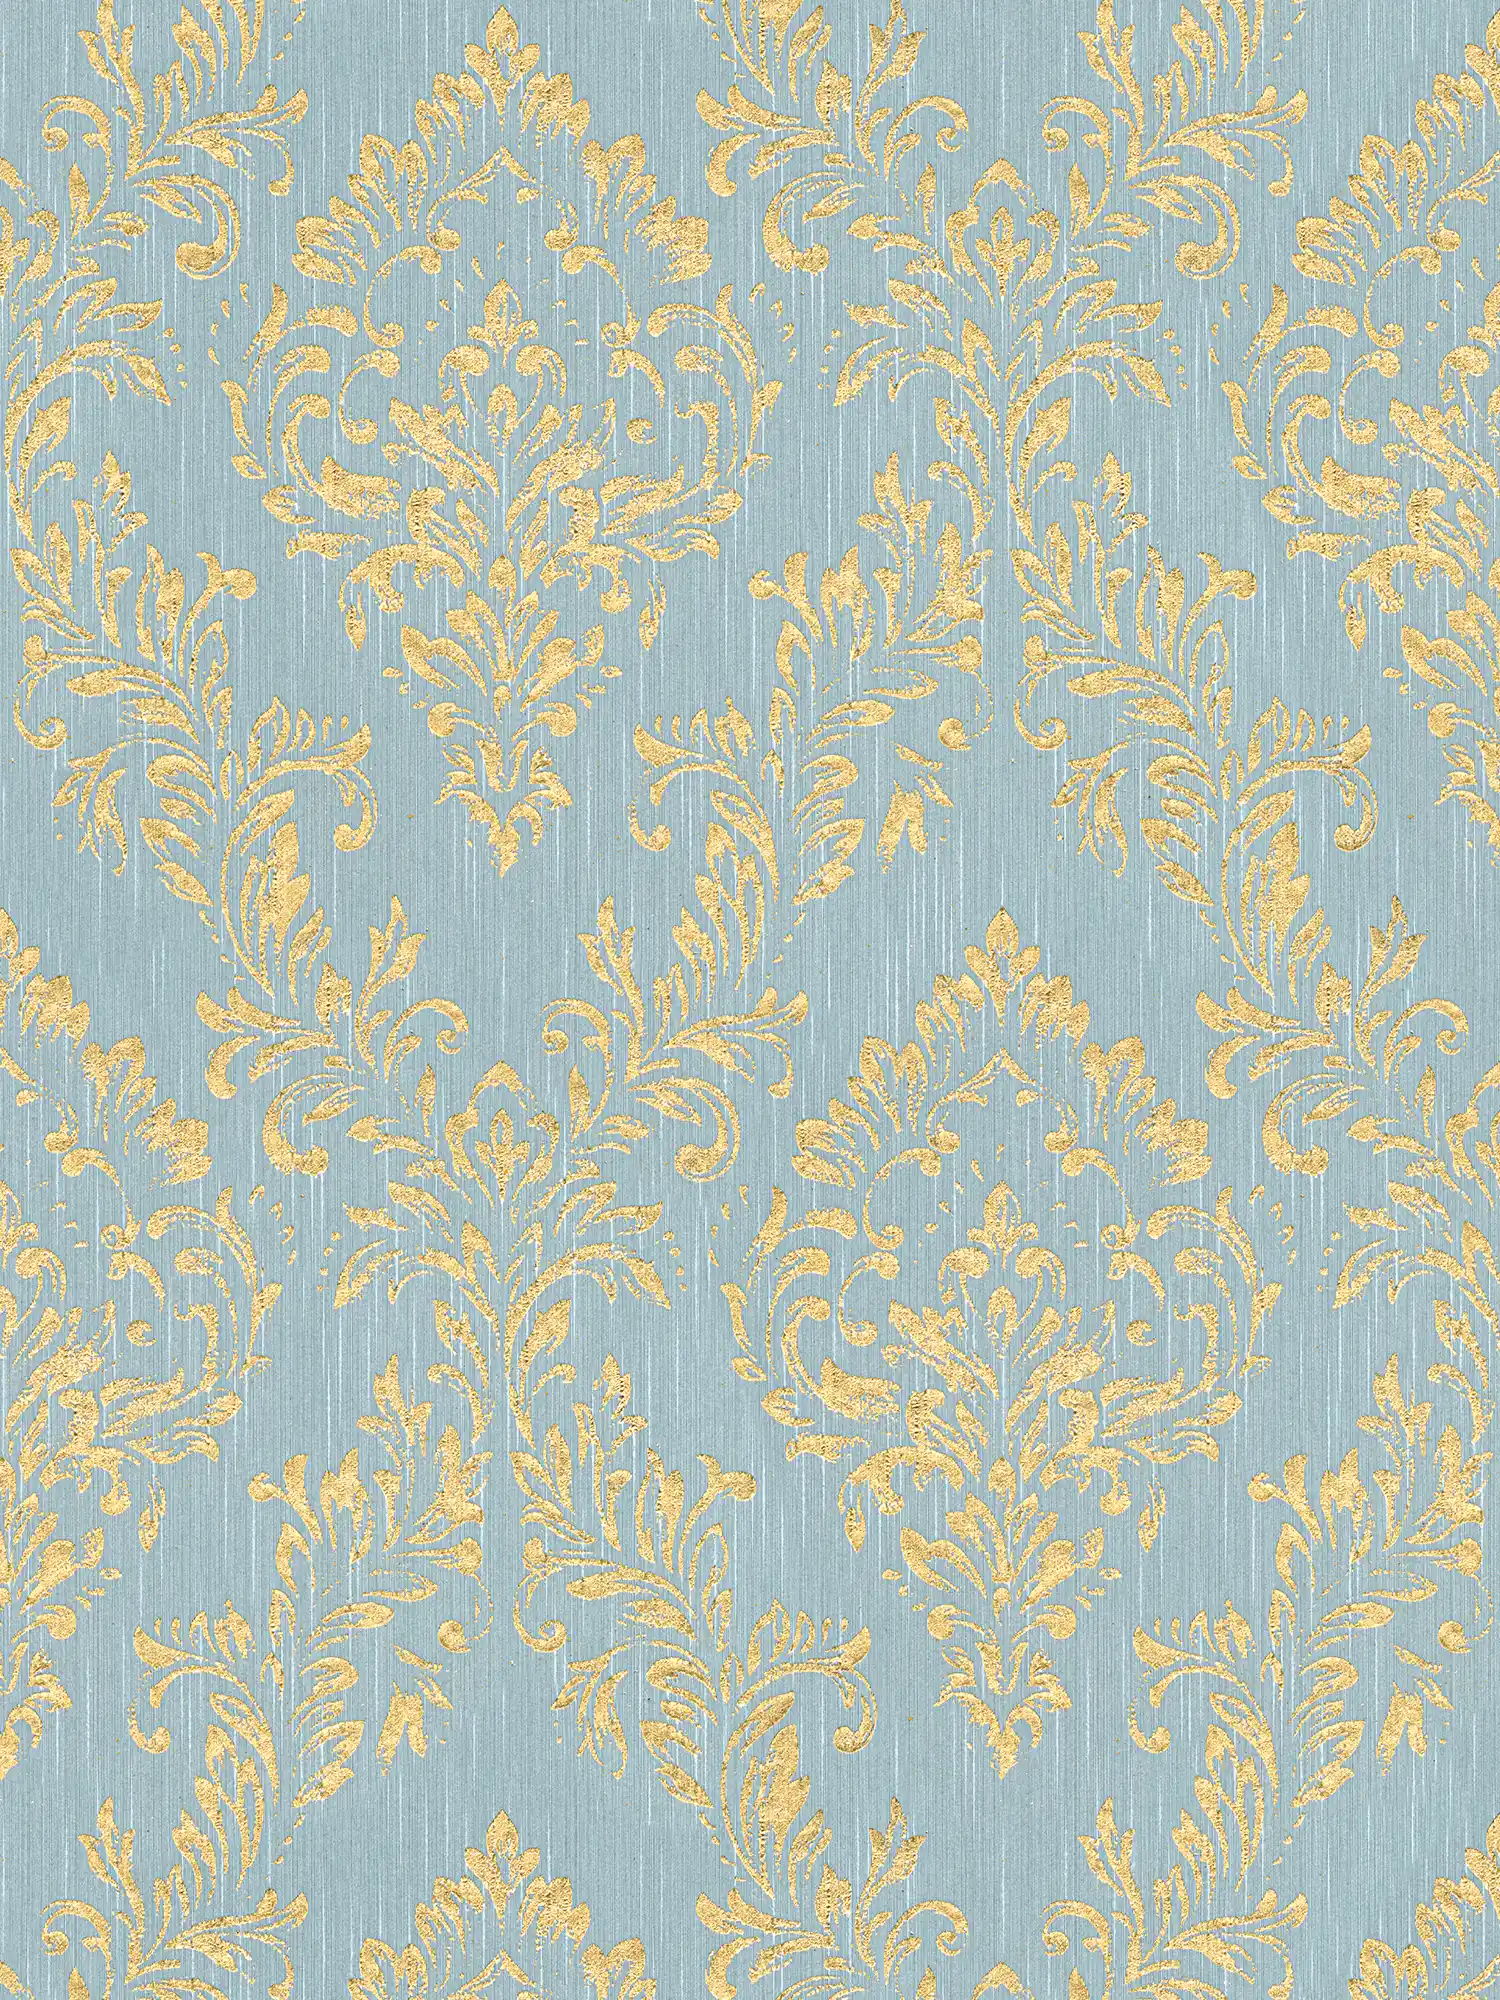         Ornament wallpaper floral with gold glitter effect - gold, blue, green
    